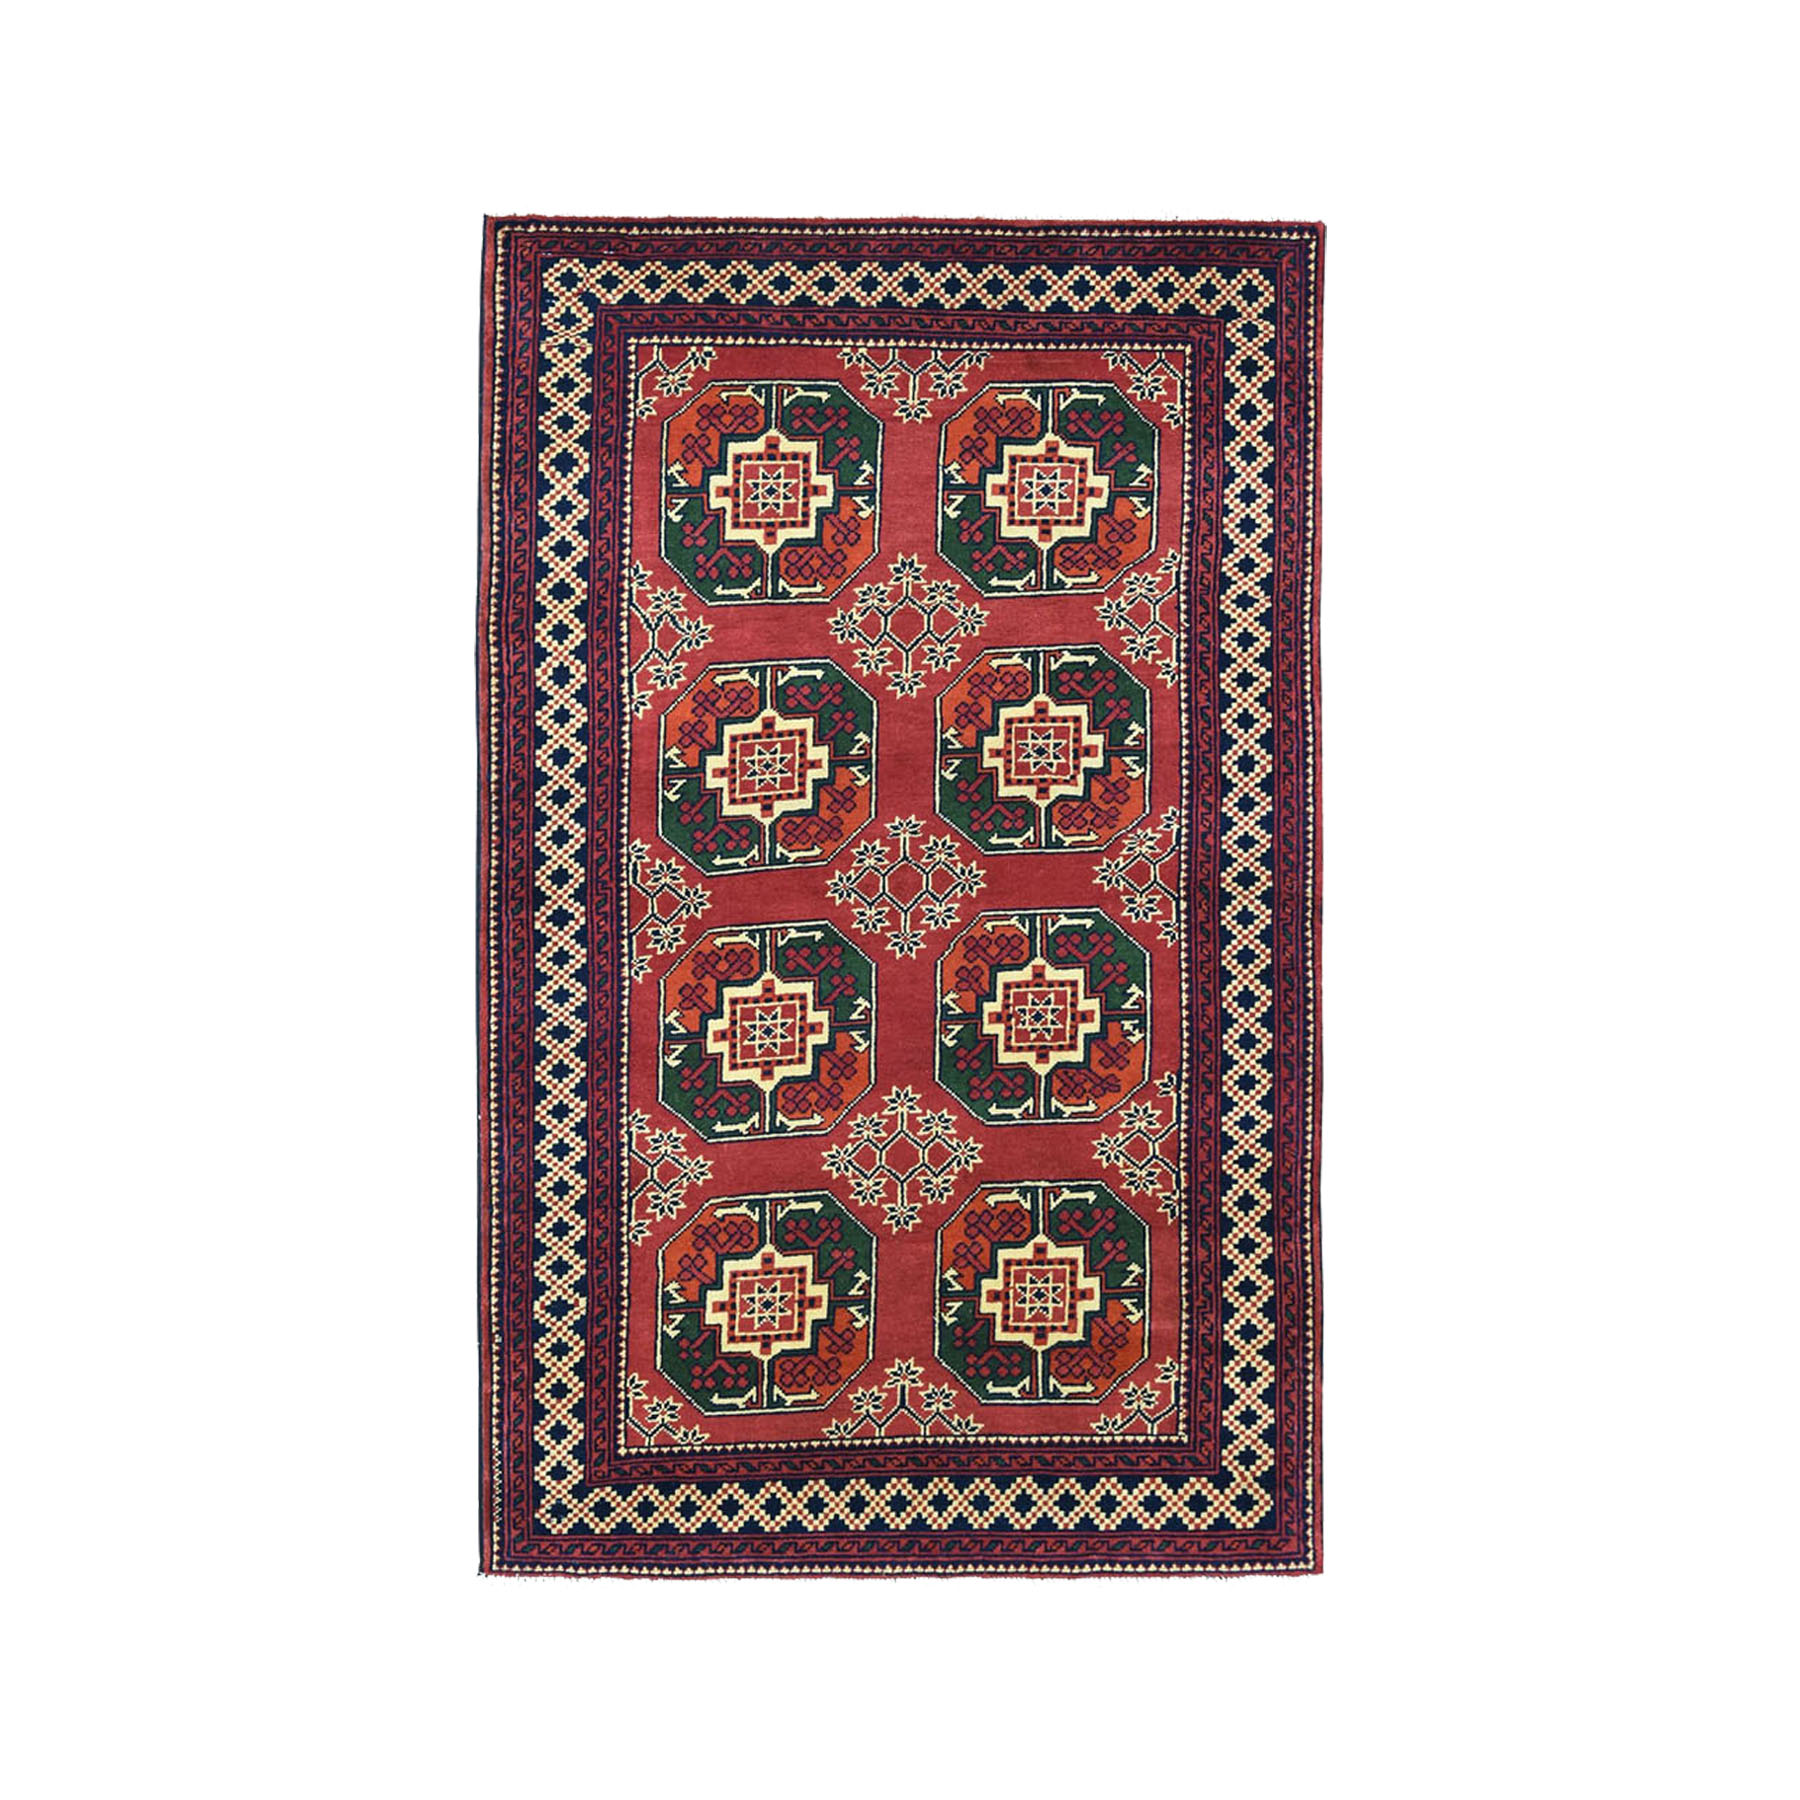 3'3"x5'3" Vintage Red Elephant Feet Design Afghan Andkhoy Pure Wool Hand Woven Oriental Rug 